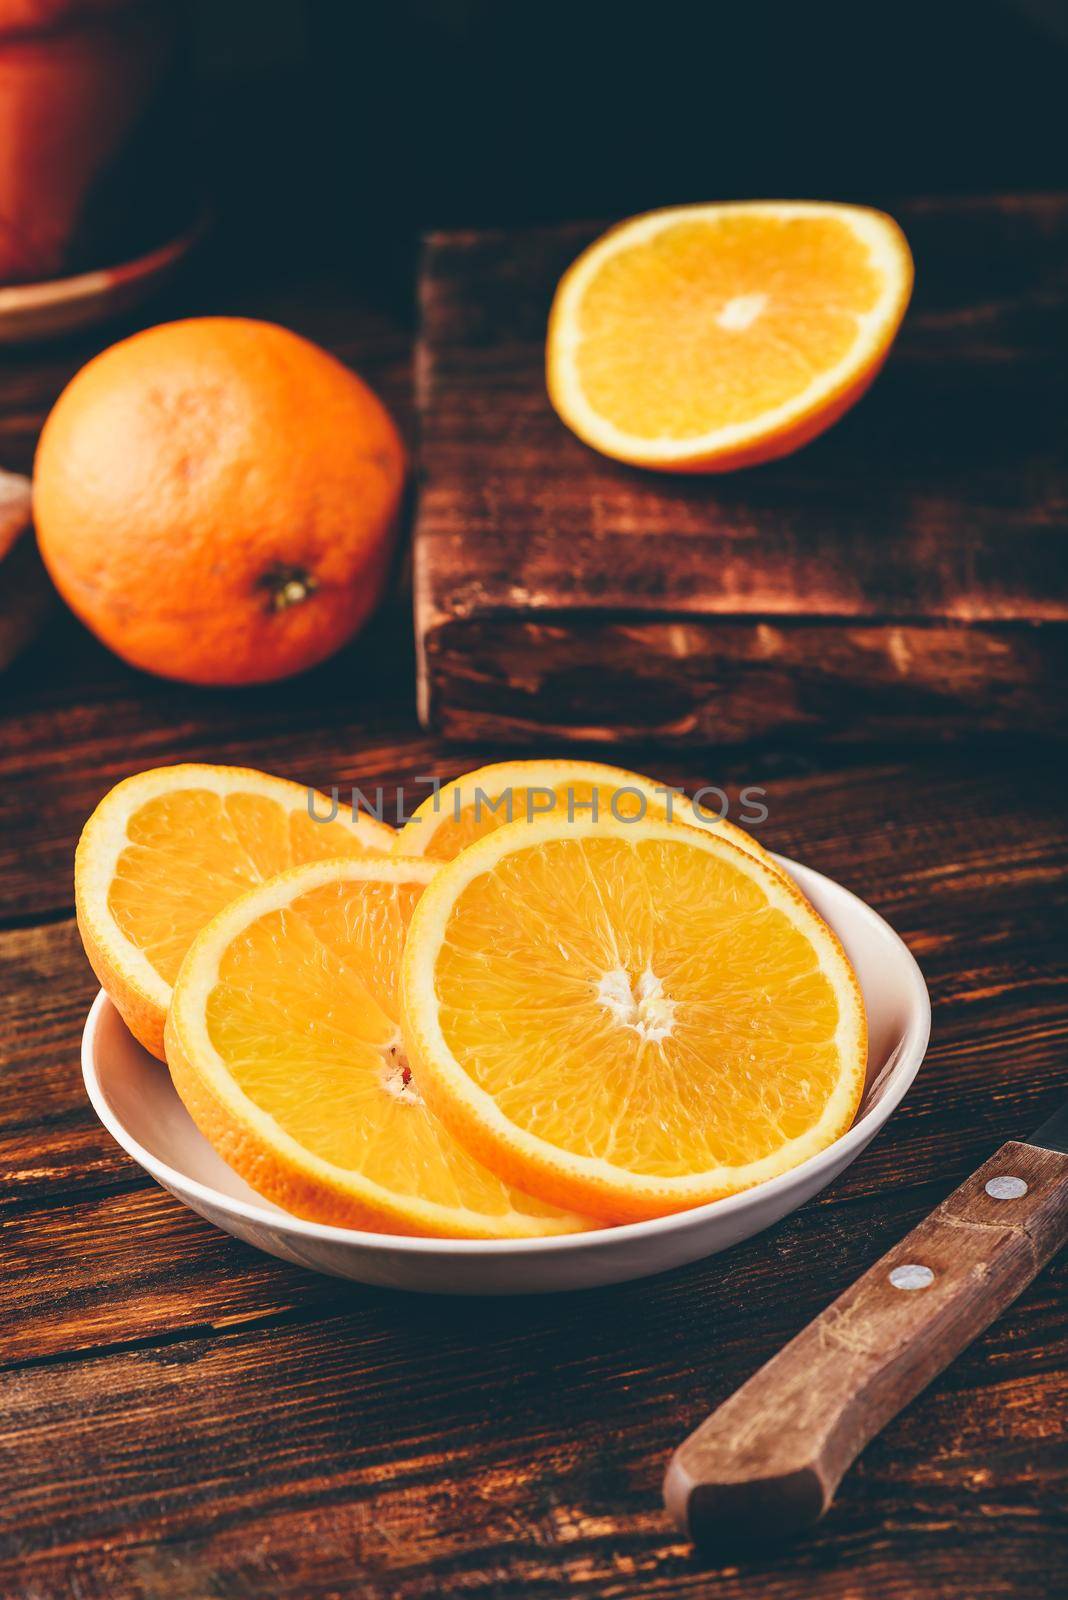 Slices of orange on white plate in rustic setting